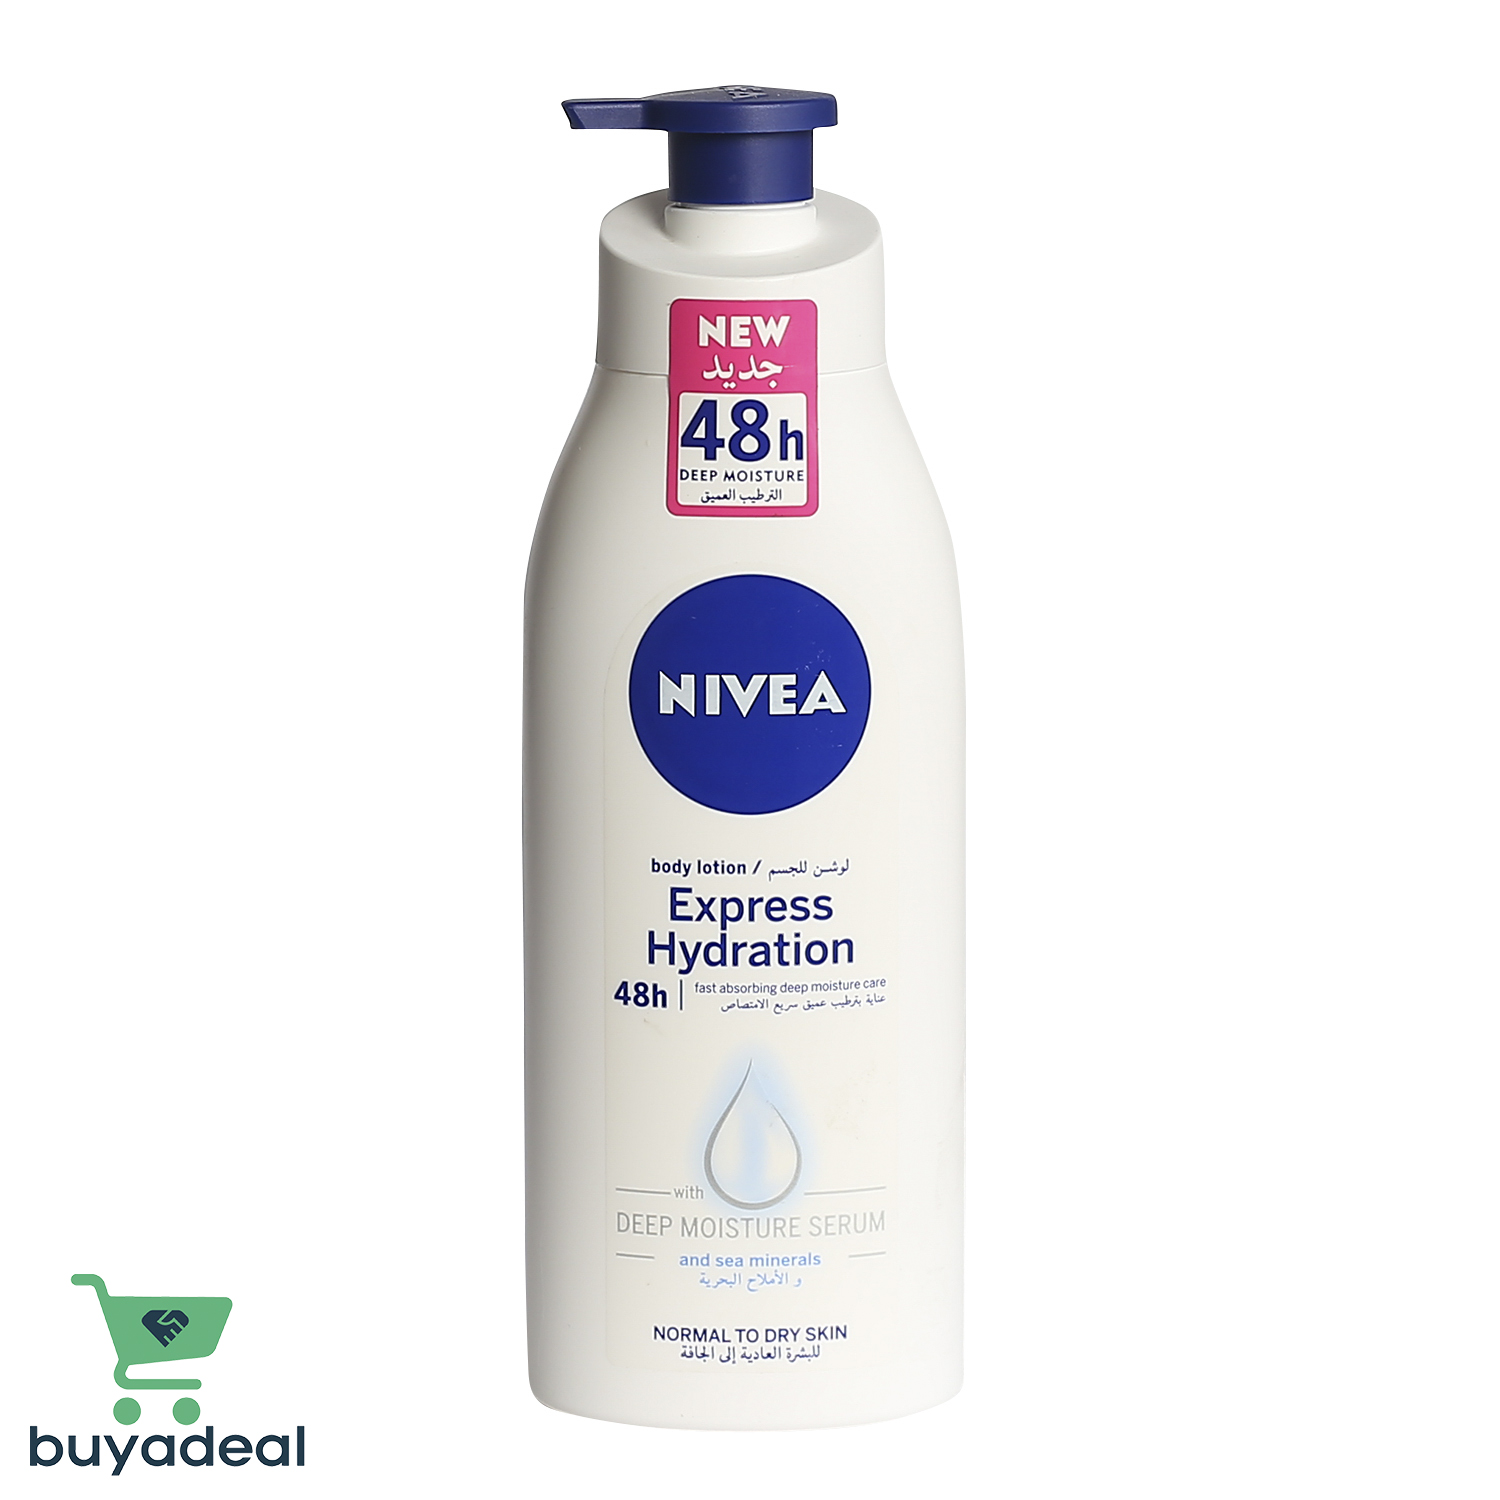 Buyadeal Product Nivea Body Lotion Express Hydration Normal To Dry Skin - 400ml